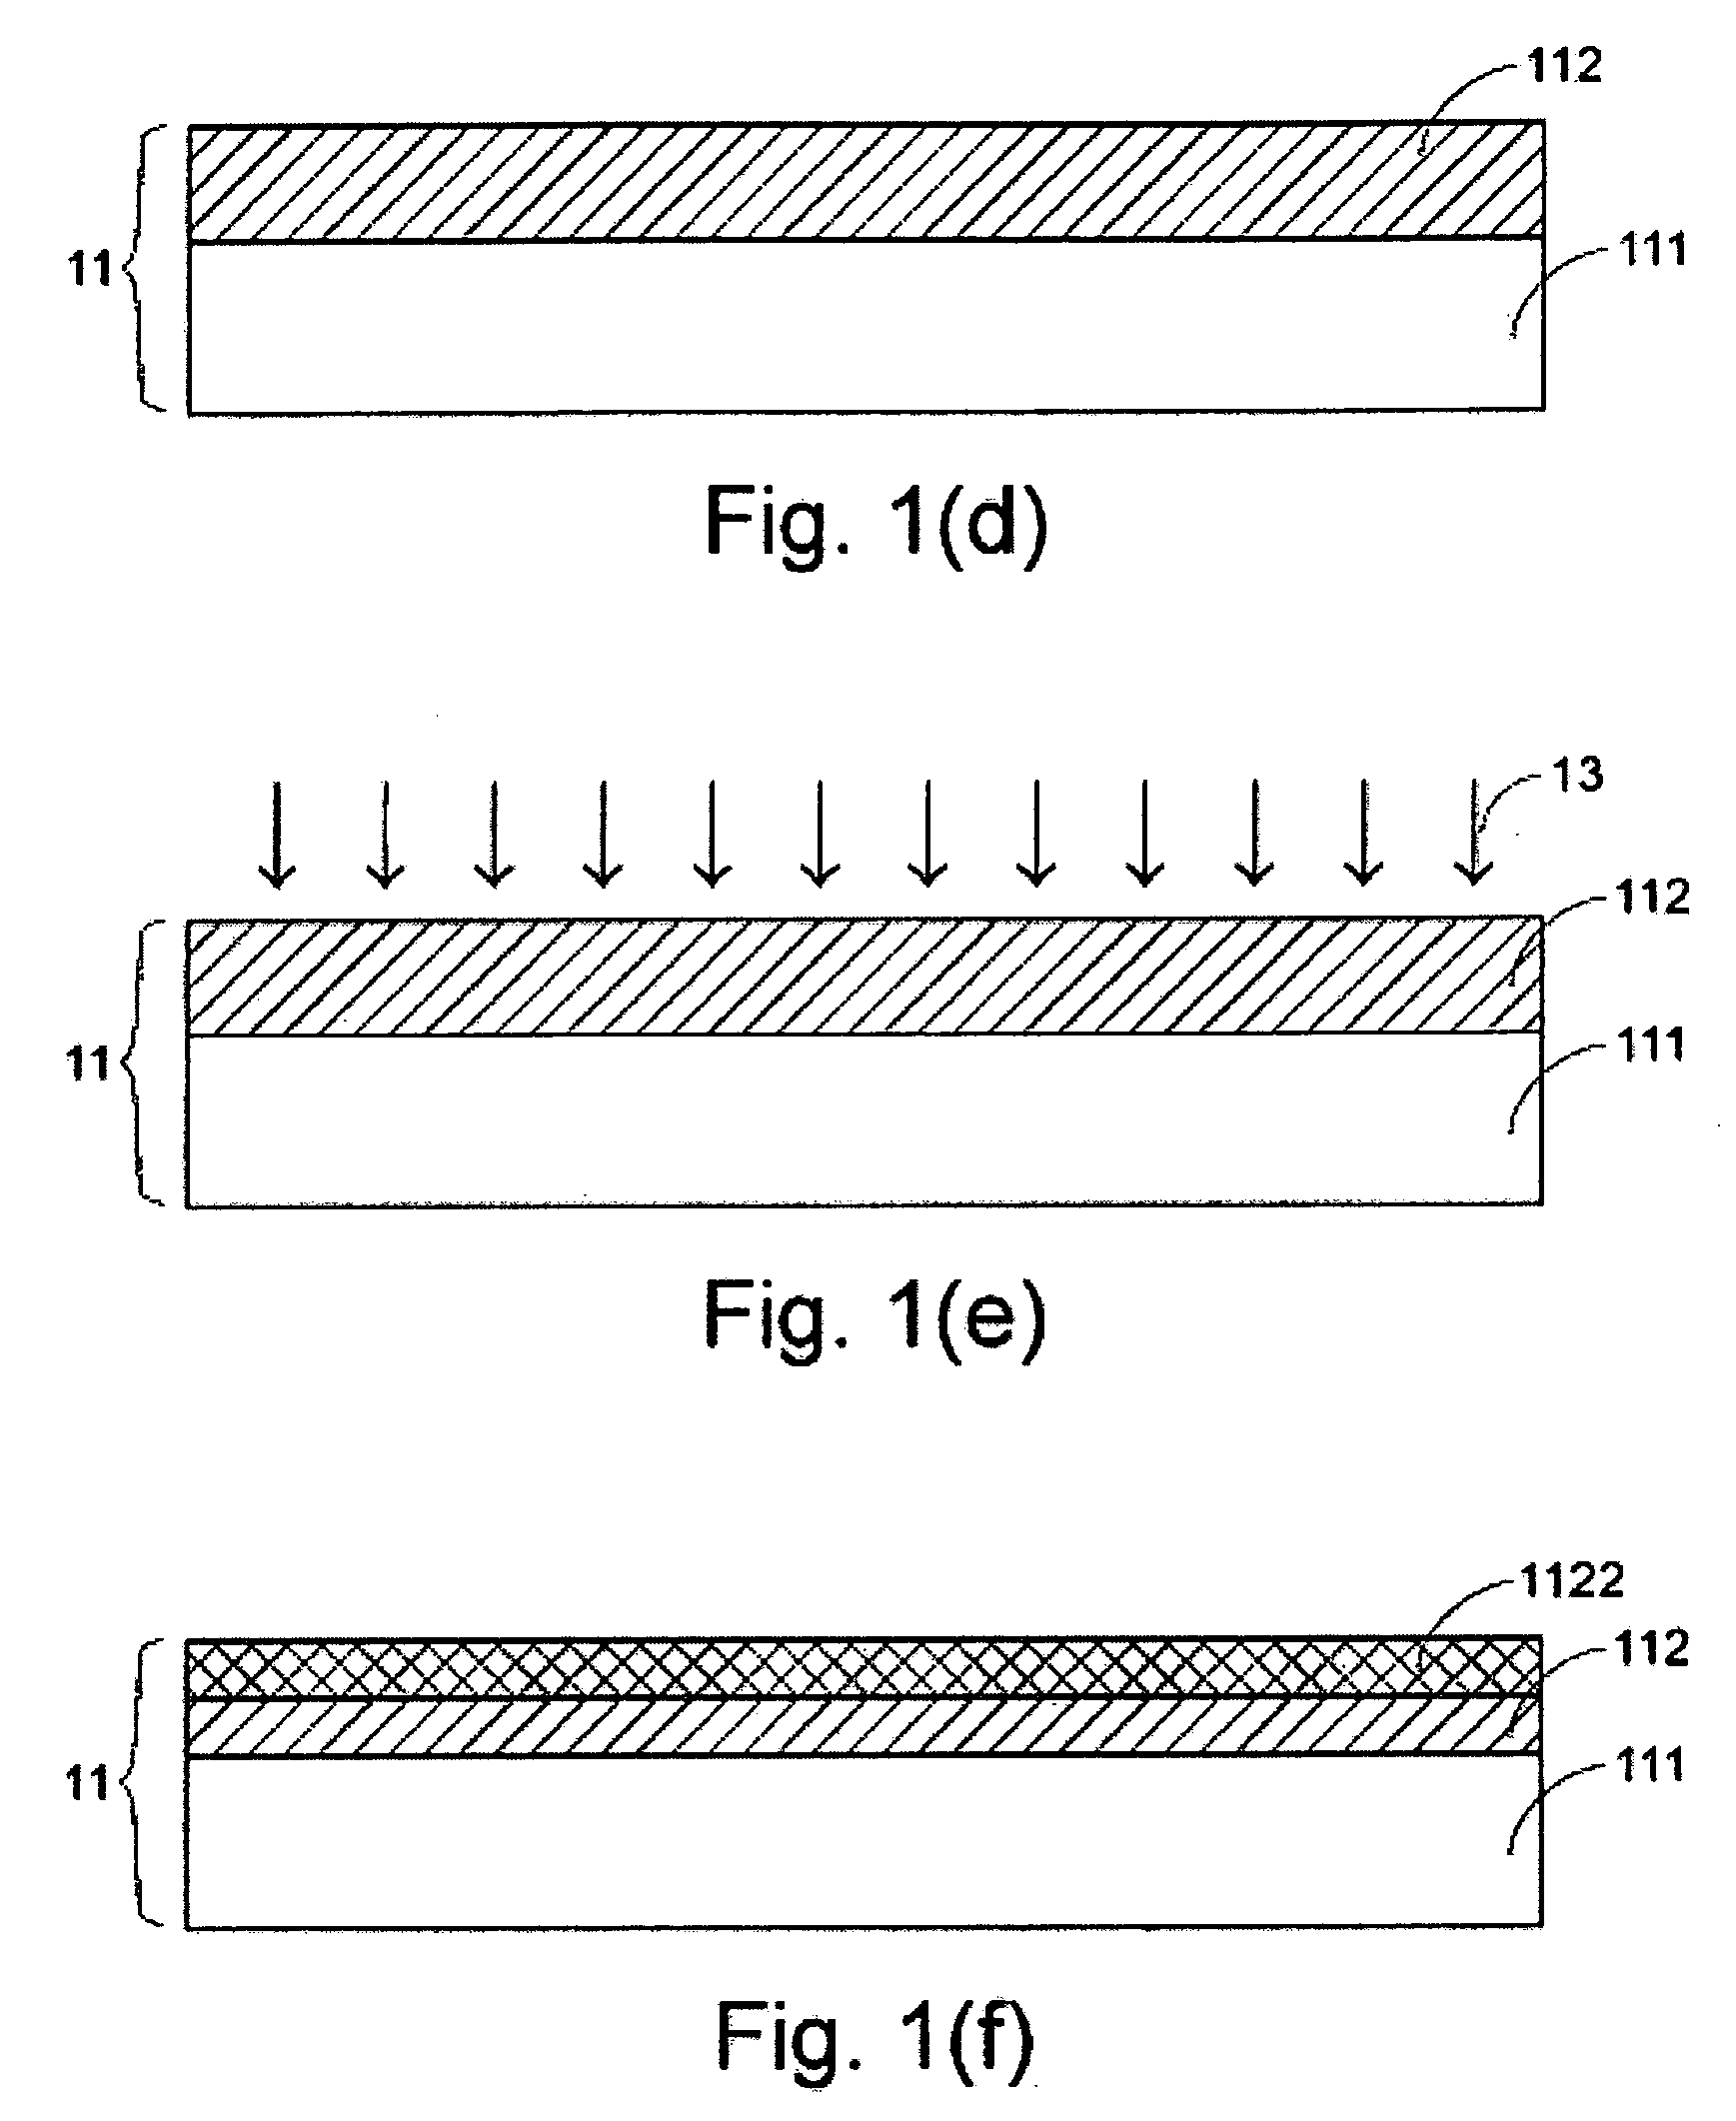 Method for reclaiming and reusing wafers